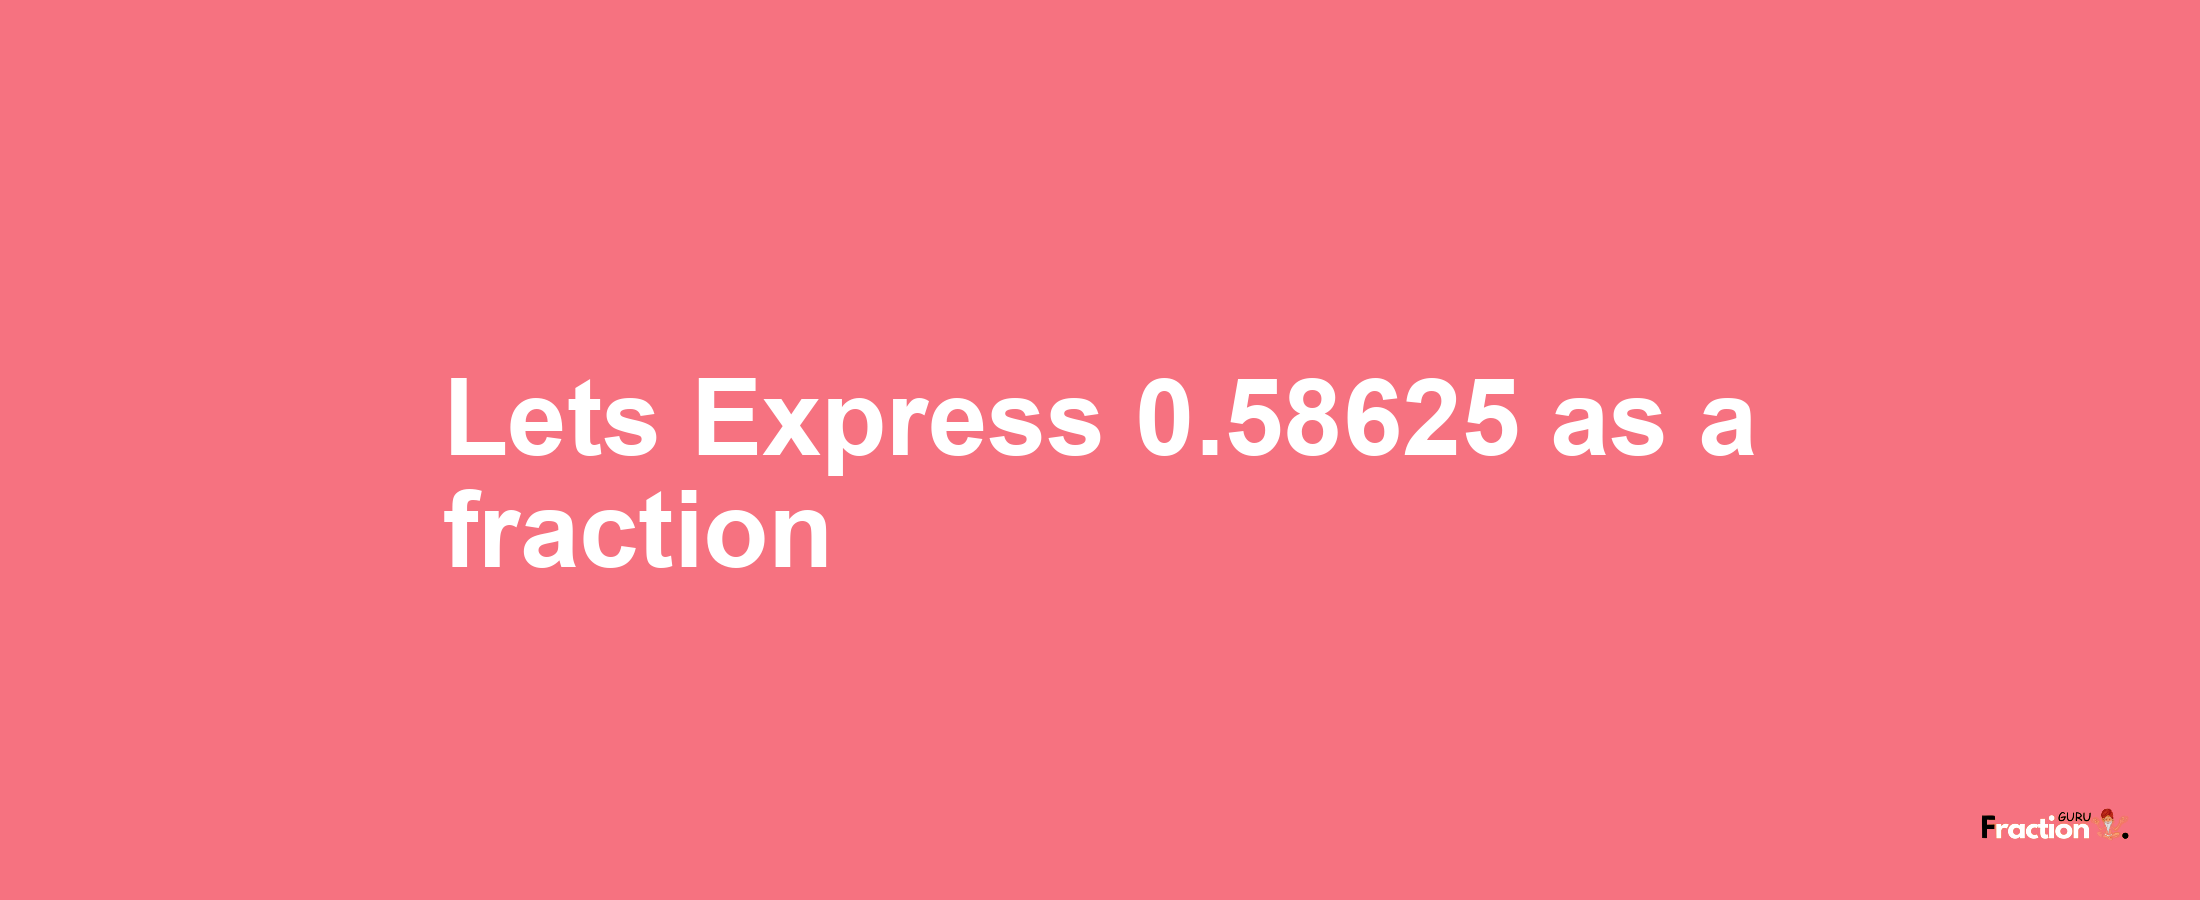 Lets Express 0.58625 as afraction